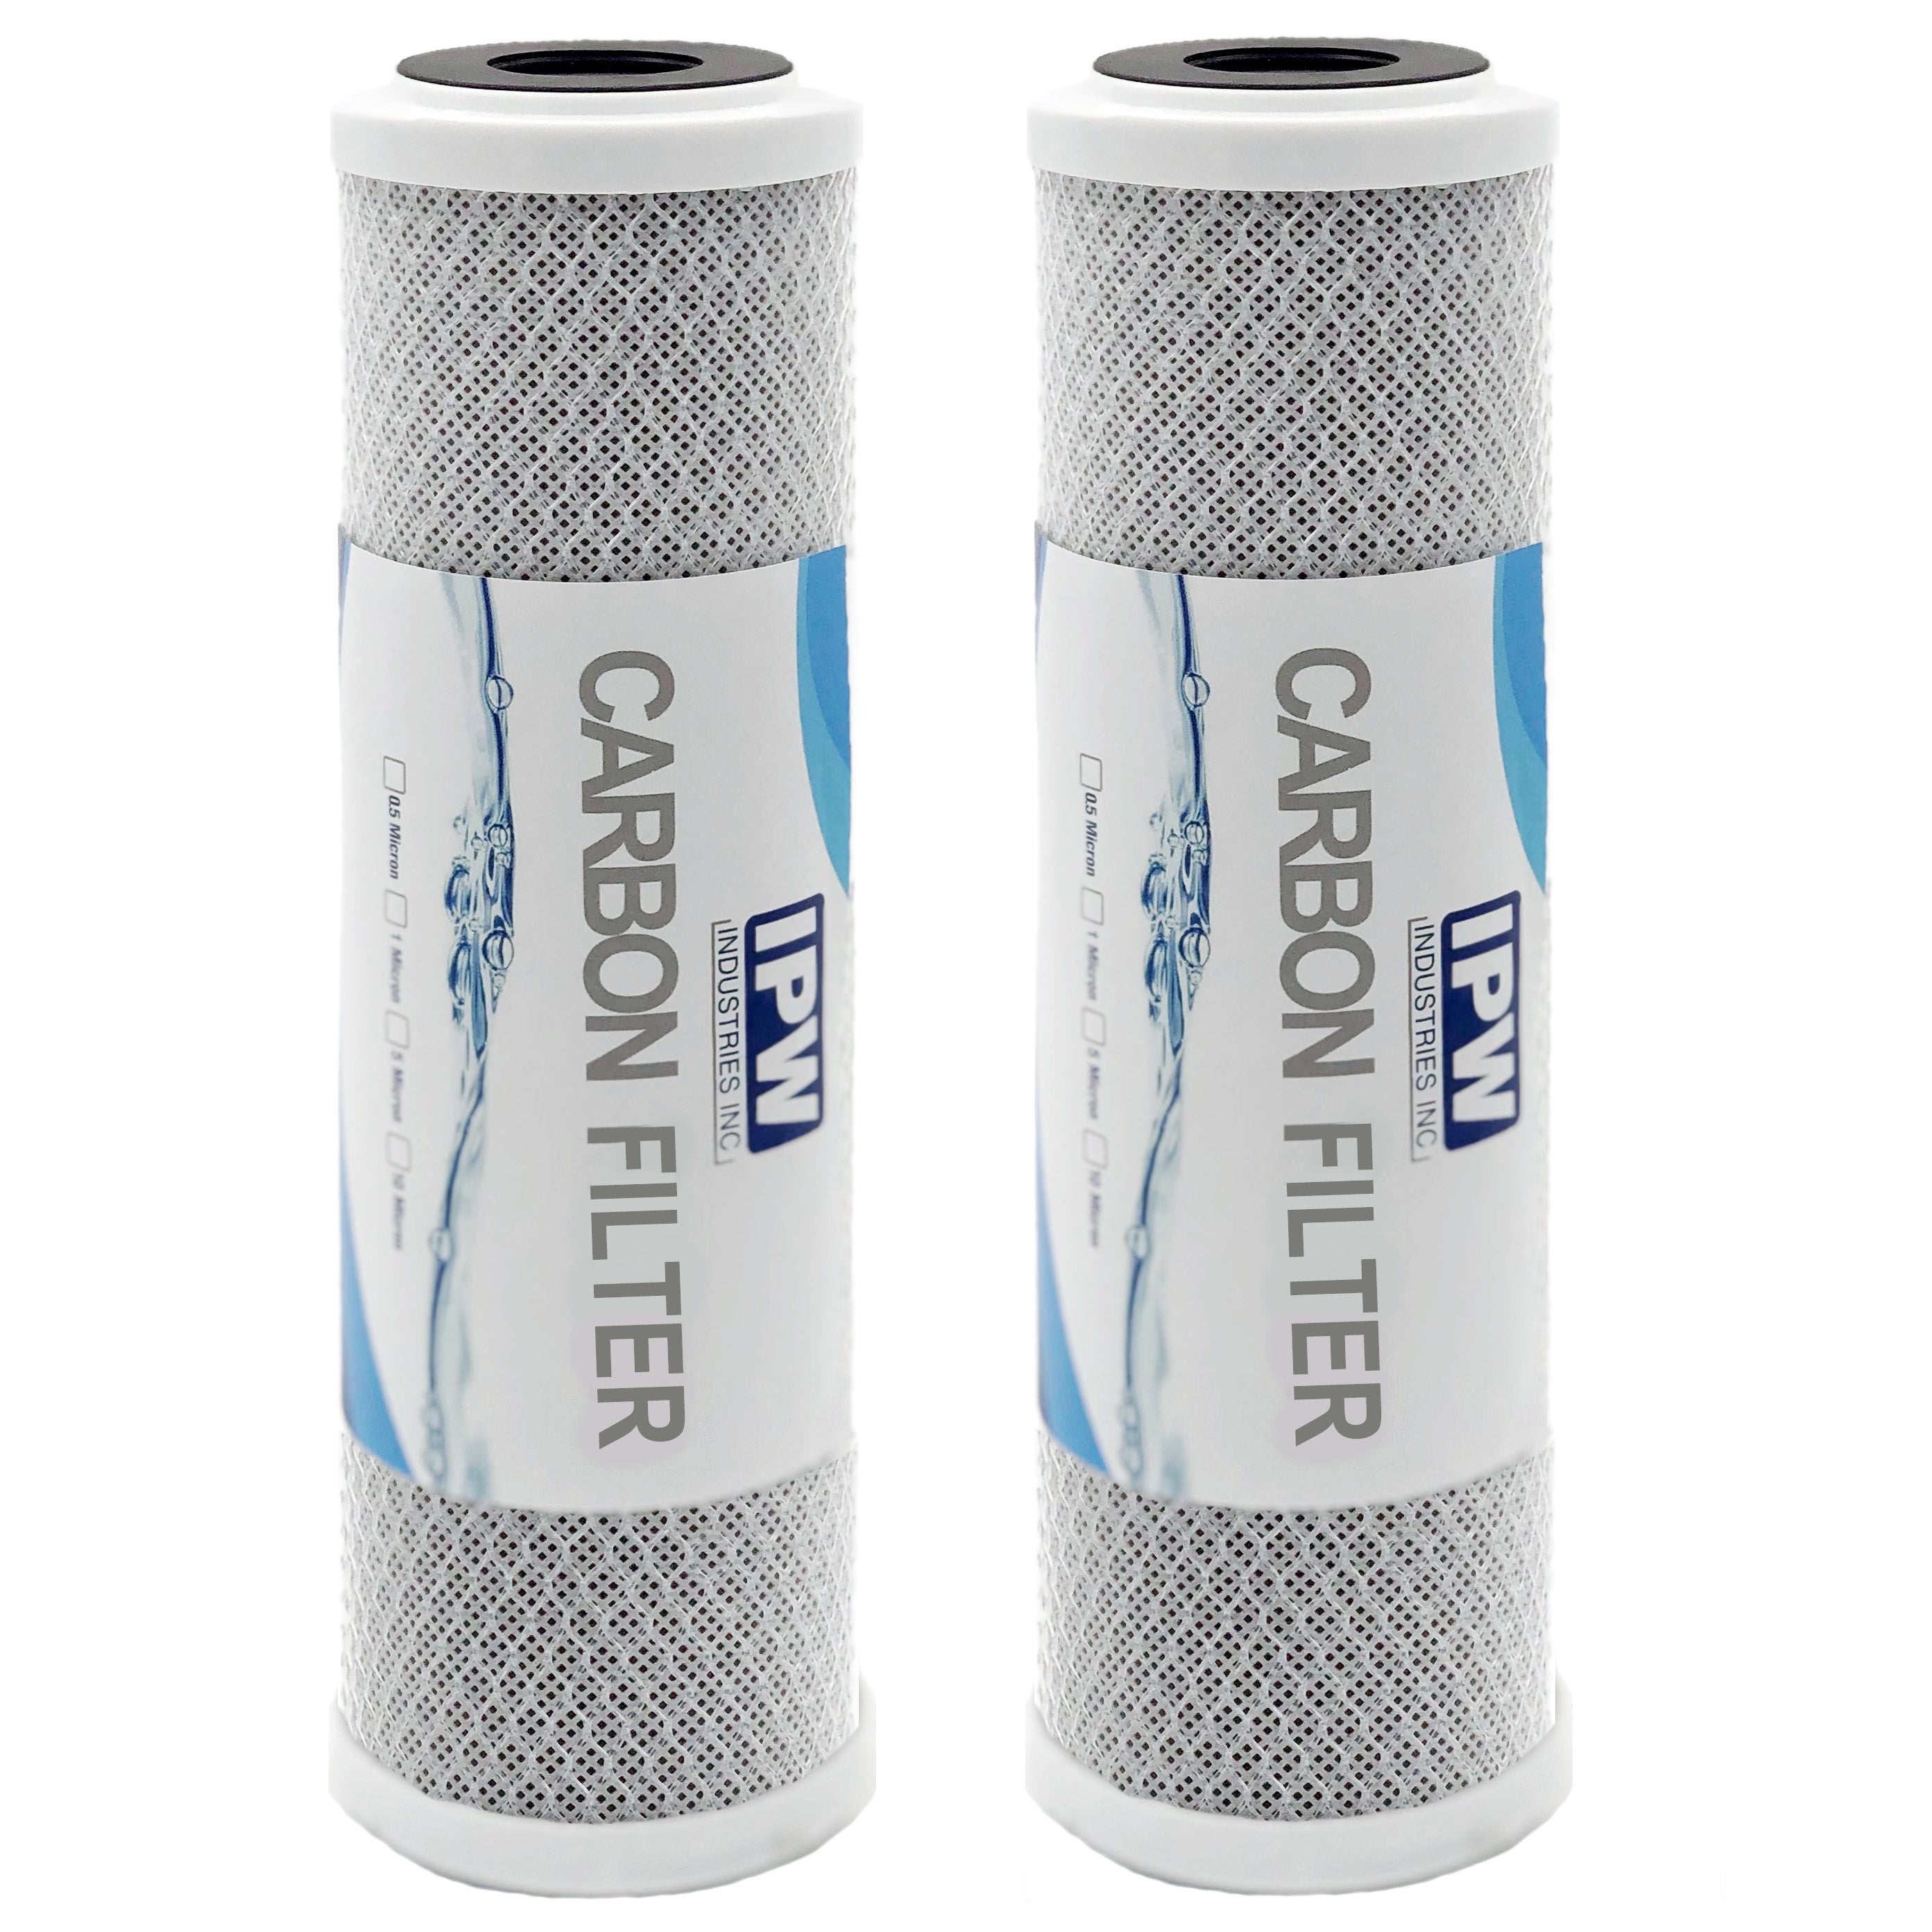 Pack Of 2 Universal Carbon Replacement Water Household Filter By Ipw Industries Inc.